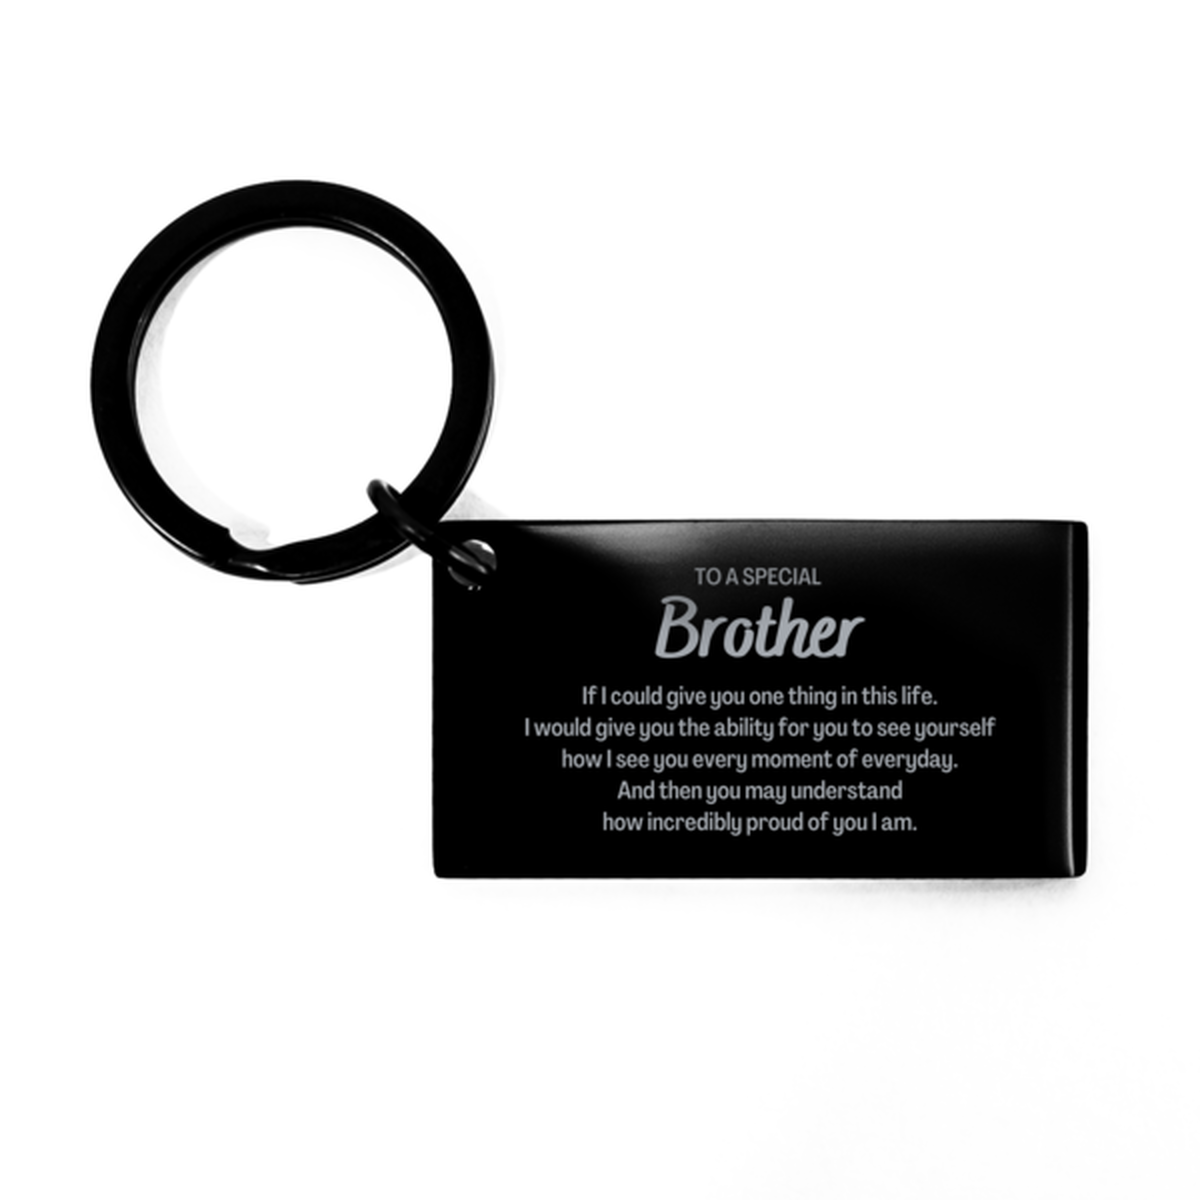 To My Brother Keychain, Gifts For Brother Engraved, Inspirational Gifts for Christmas Birthday, Epic Gifts for Brother To A Special Brother how incredibly proud of you I am